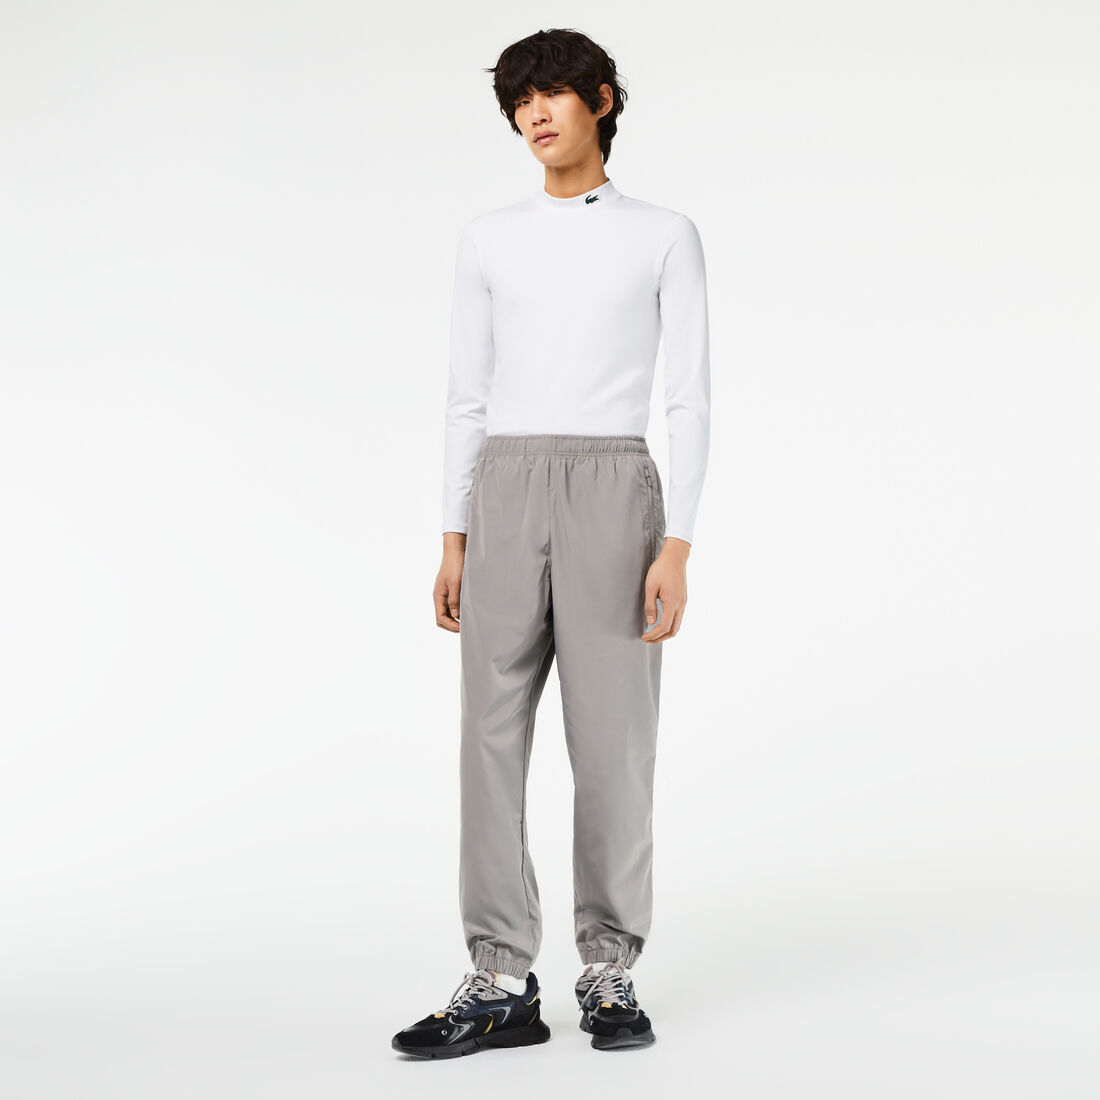 Men's Lacoste Track Pants with GPS Coordinates